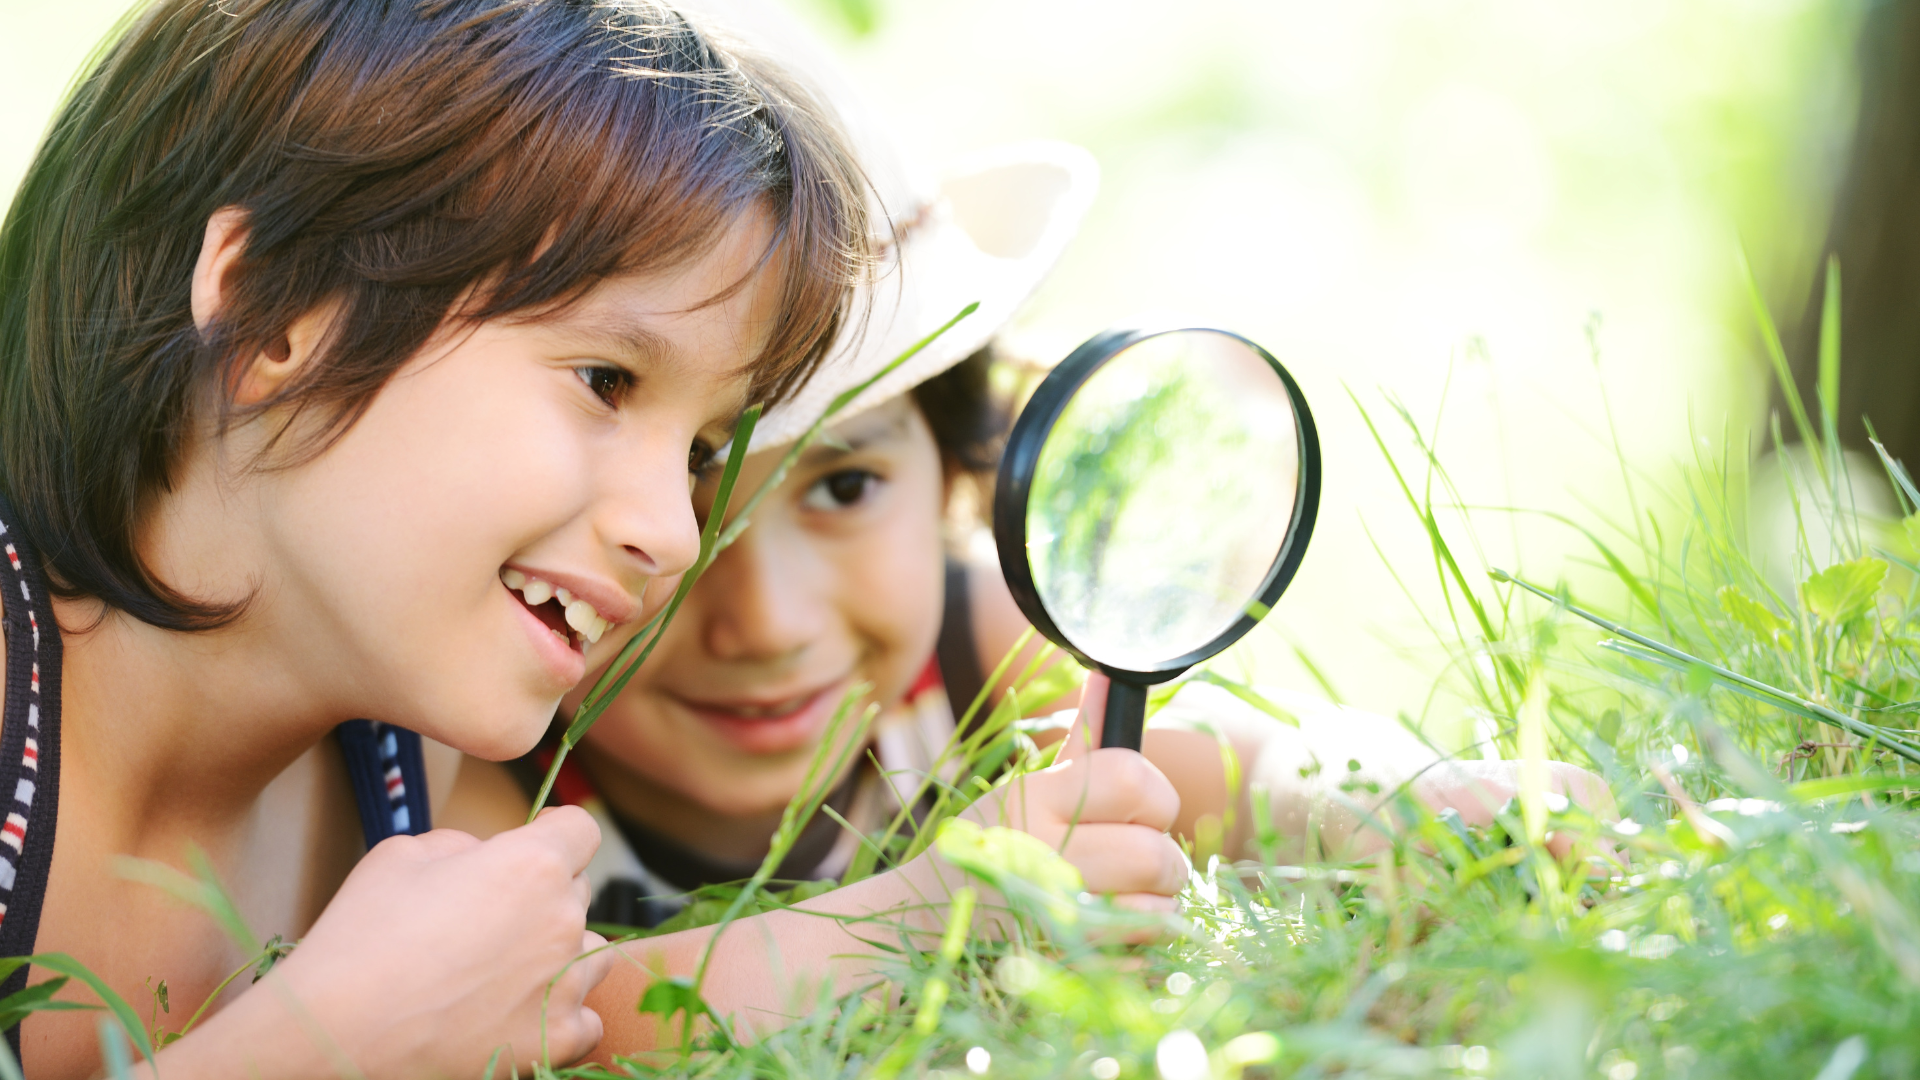 Image of a young girl holding a magnifying glass.